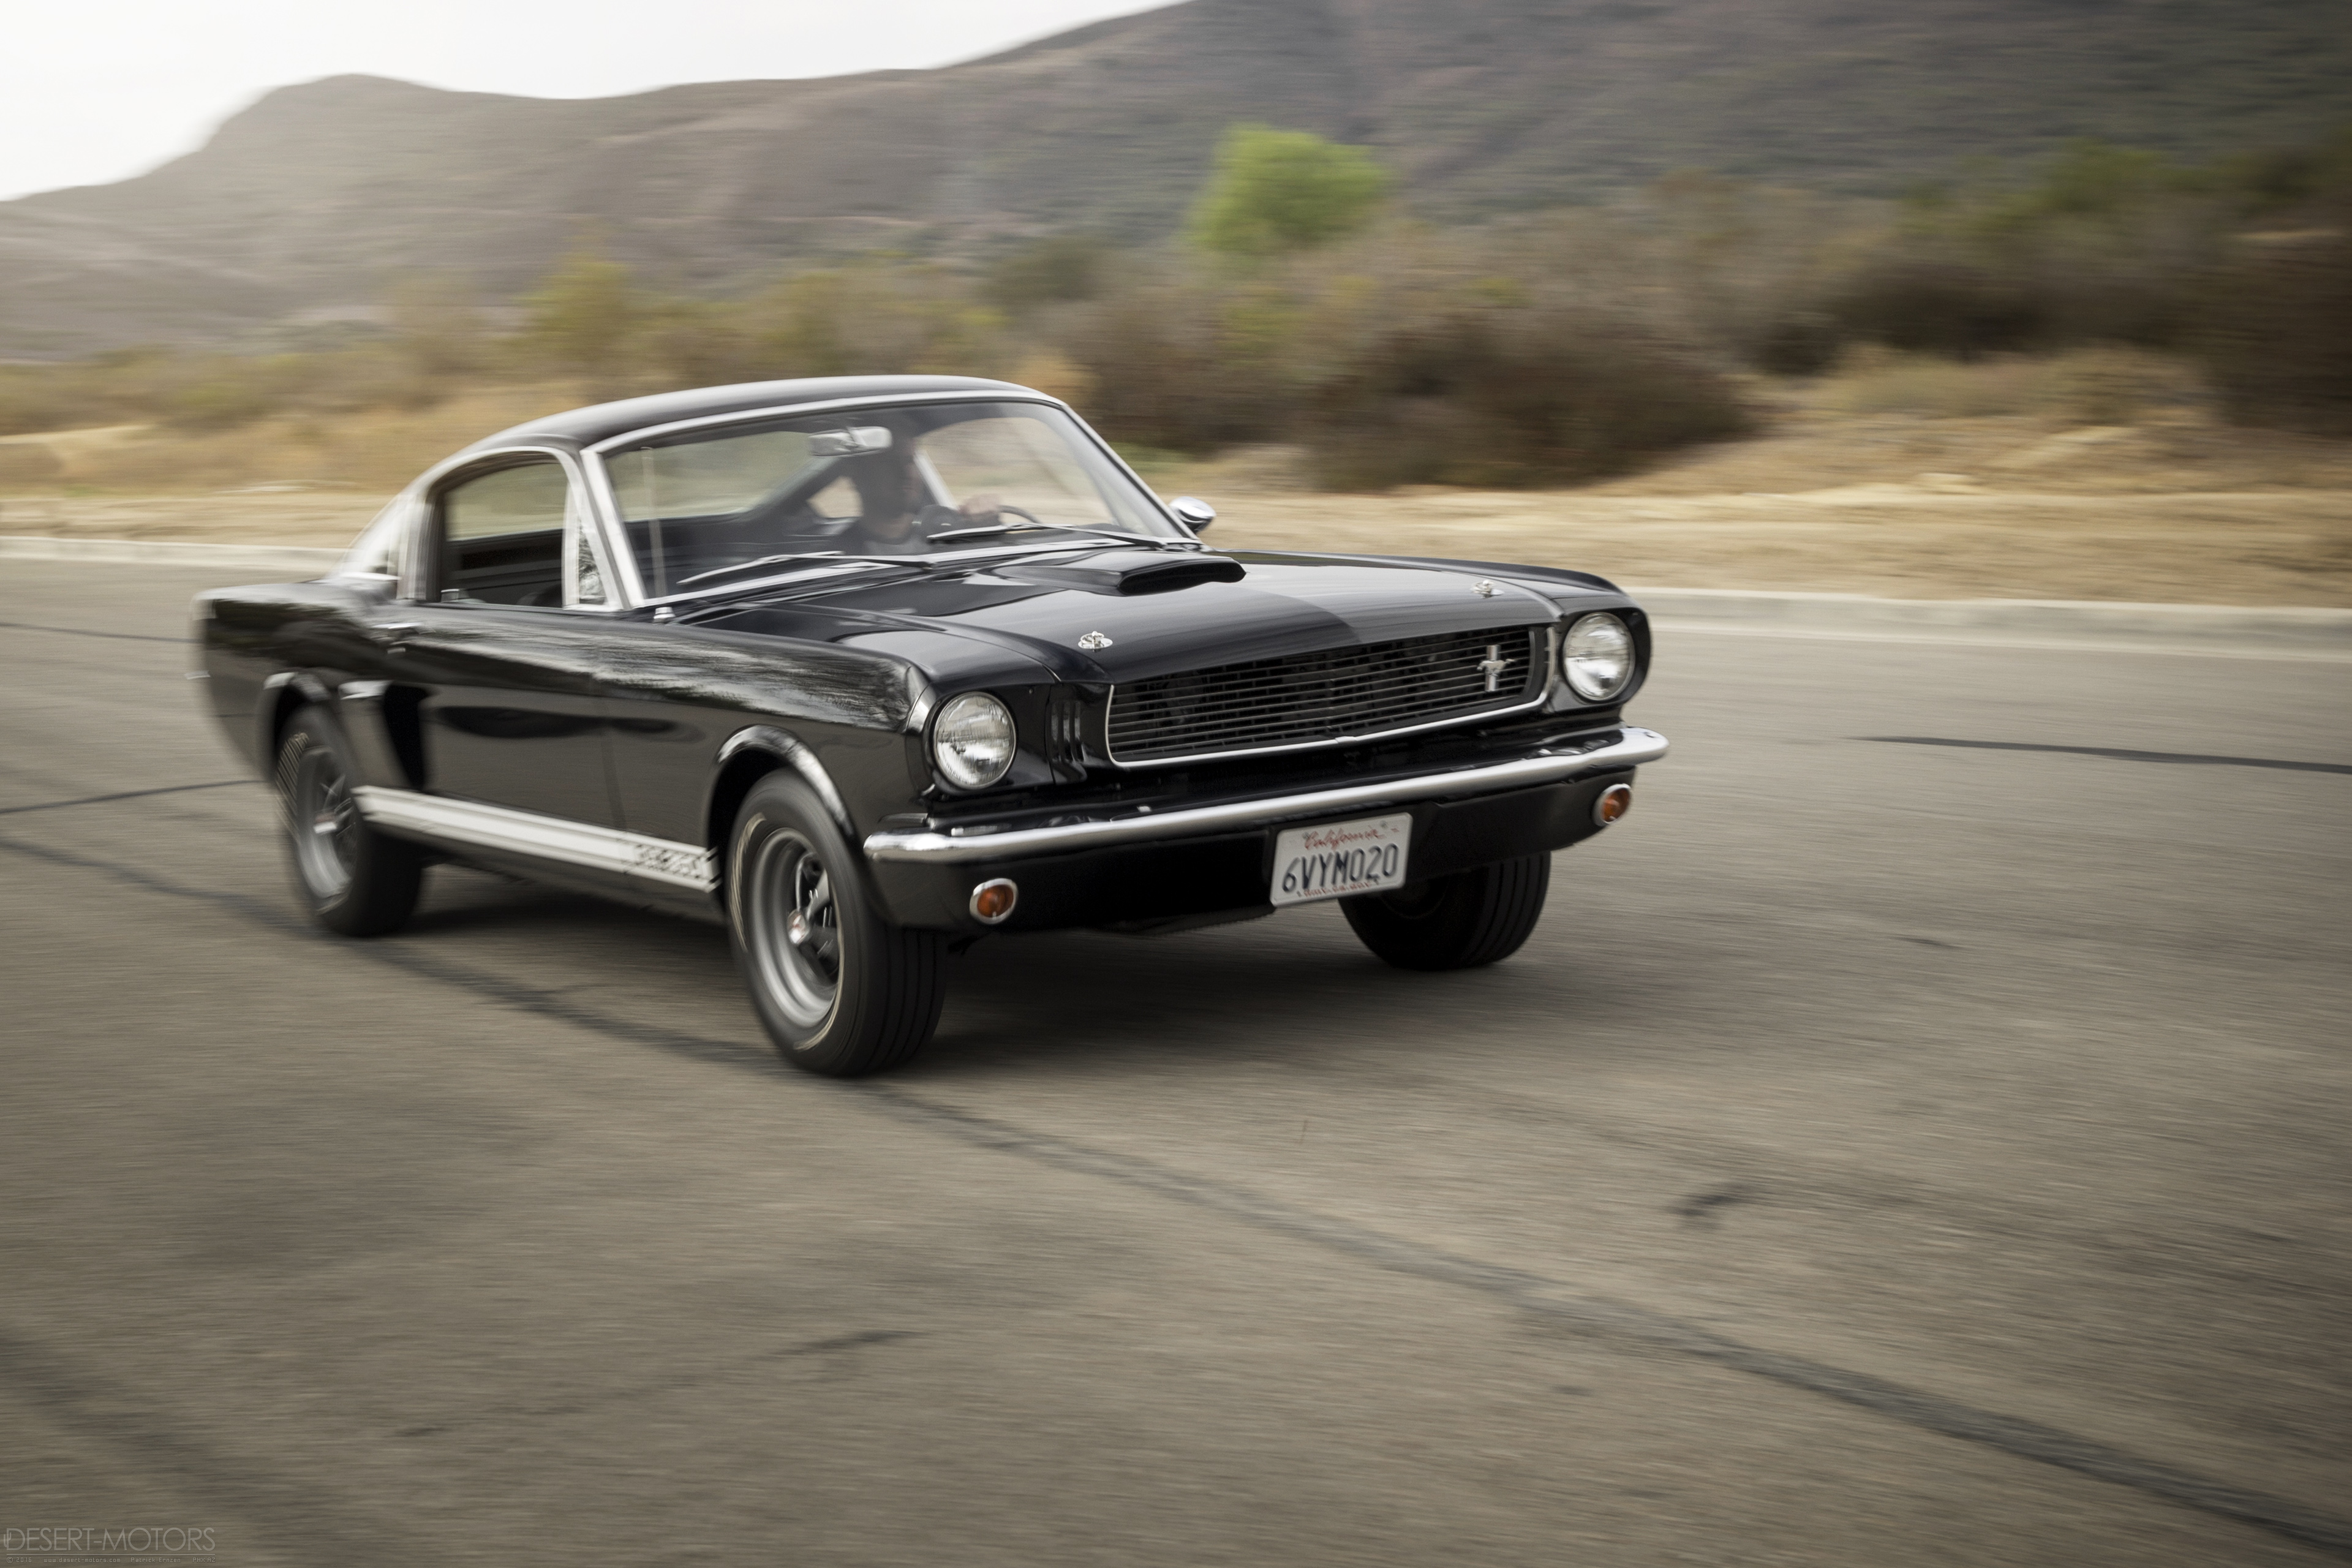 Shelby GT 350 Mustang GT350 Black Cars Muscle Cars American Cars Pony Cars Classic Car 3840x2560